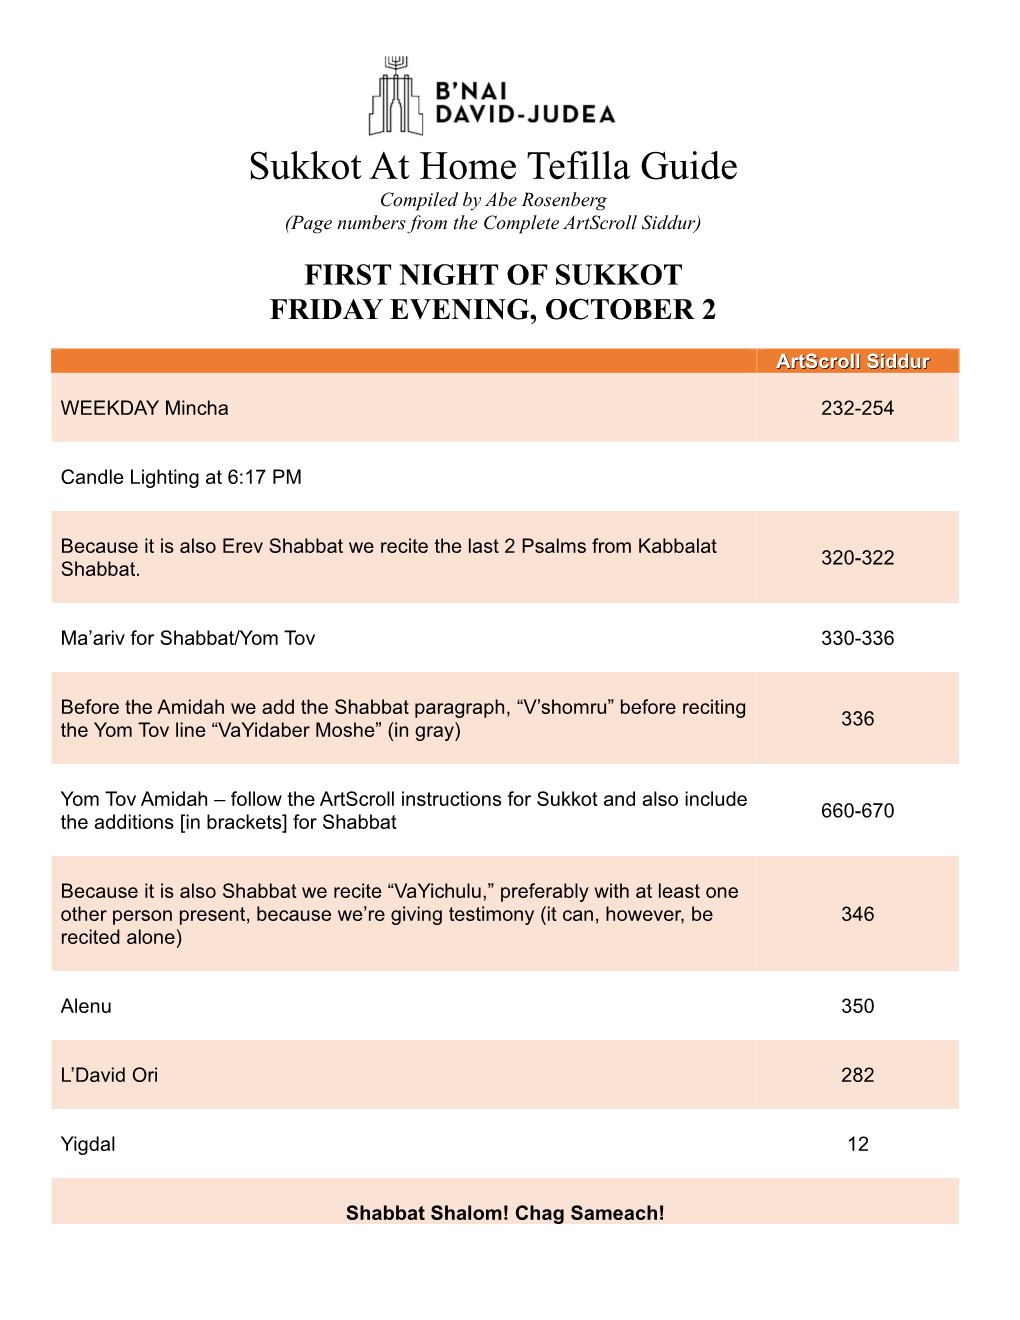 Sukkot at Home Tefilla Guide Compiled by Abe Rosenberg (Page Numbers from the Complete Artscroll Siddur)